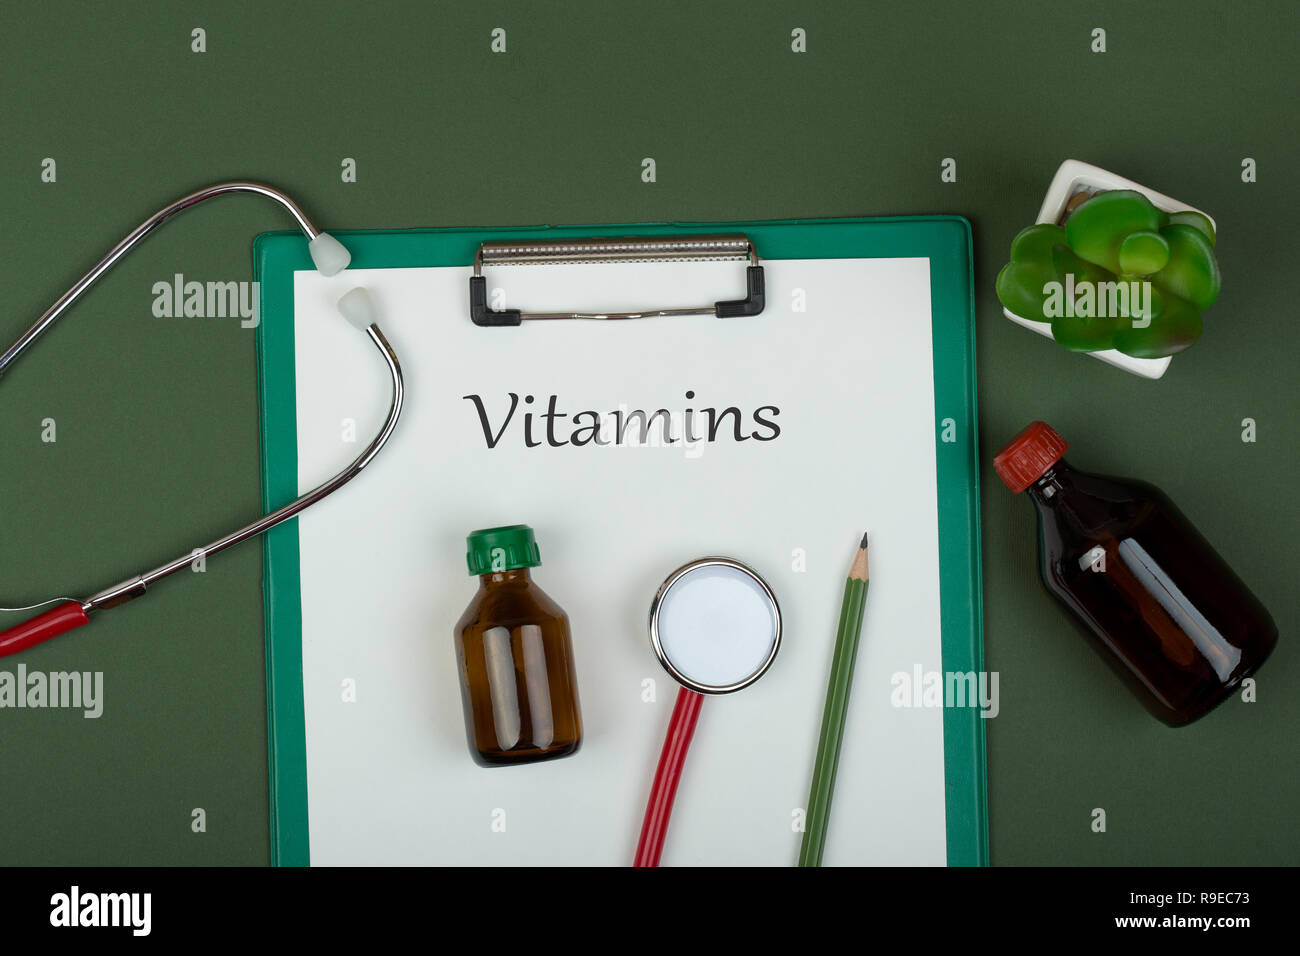 Doctor workplace - red stethoscope, medical bottles and clipboard with text 'Vitamins' on green paper background Stock Photo